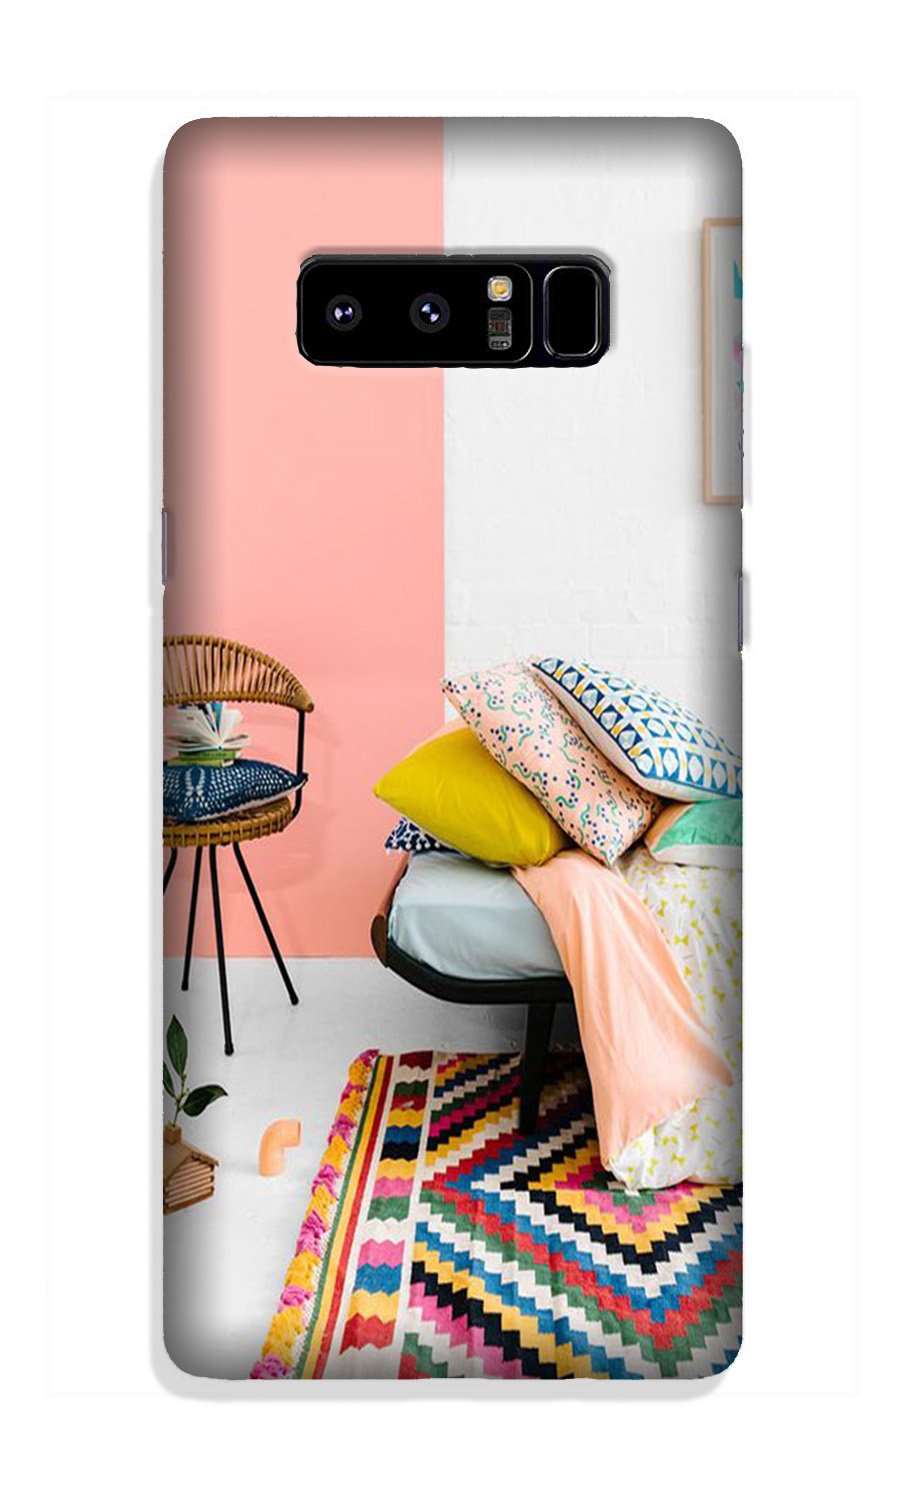 Home Décor Case for Galaxy Note 8